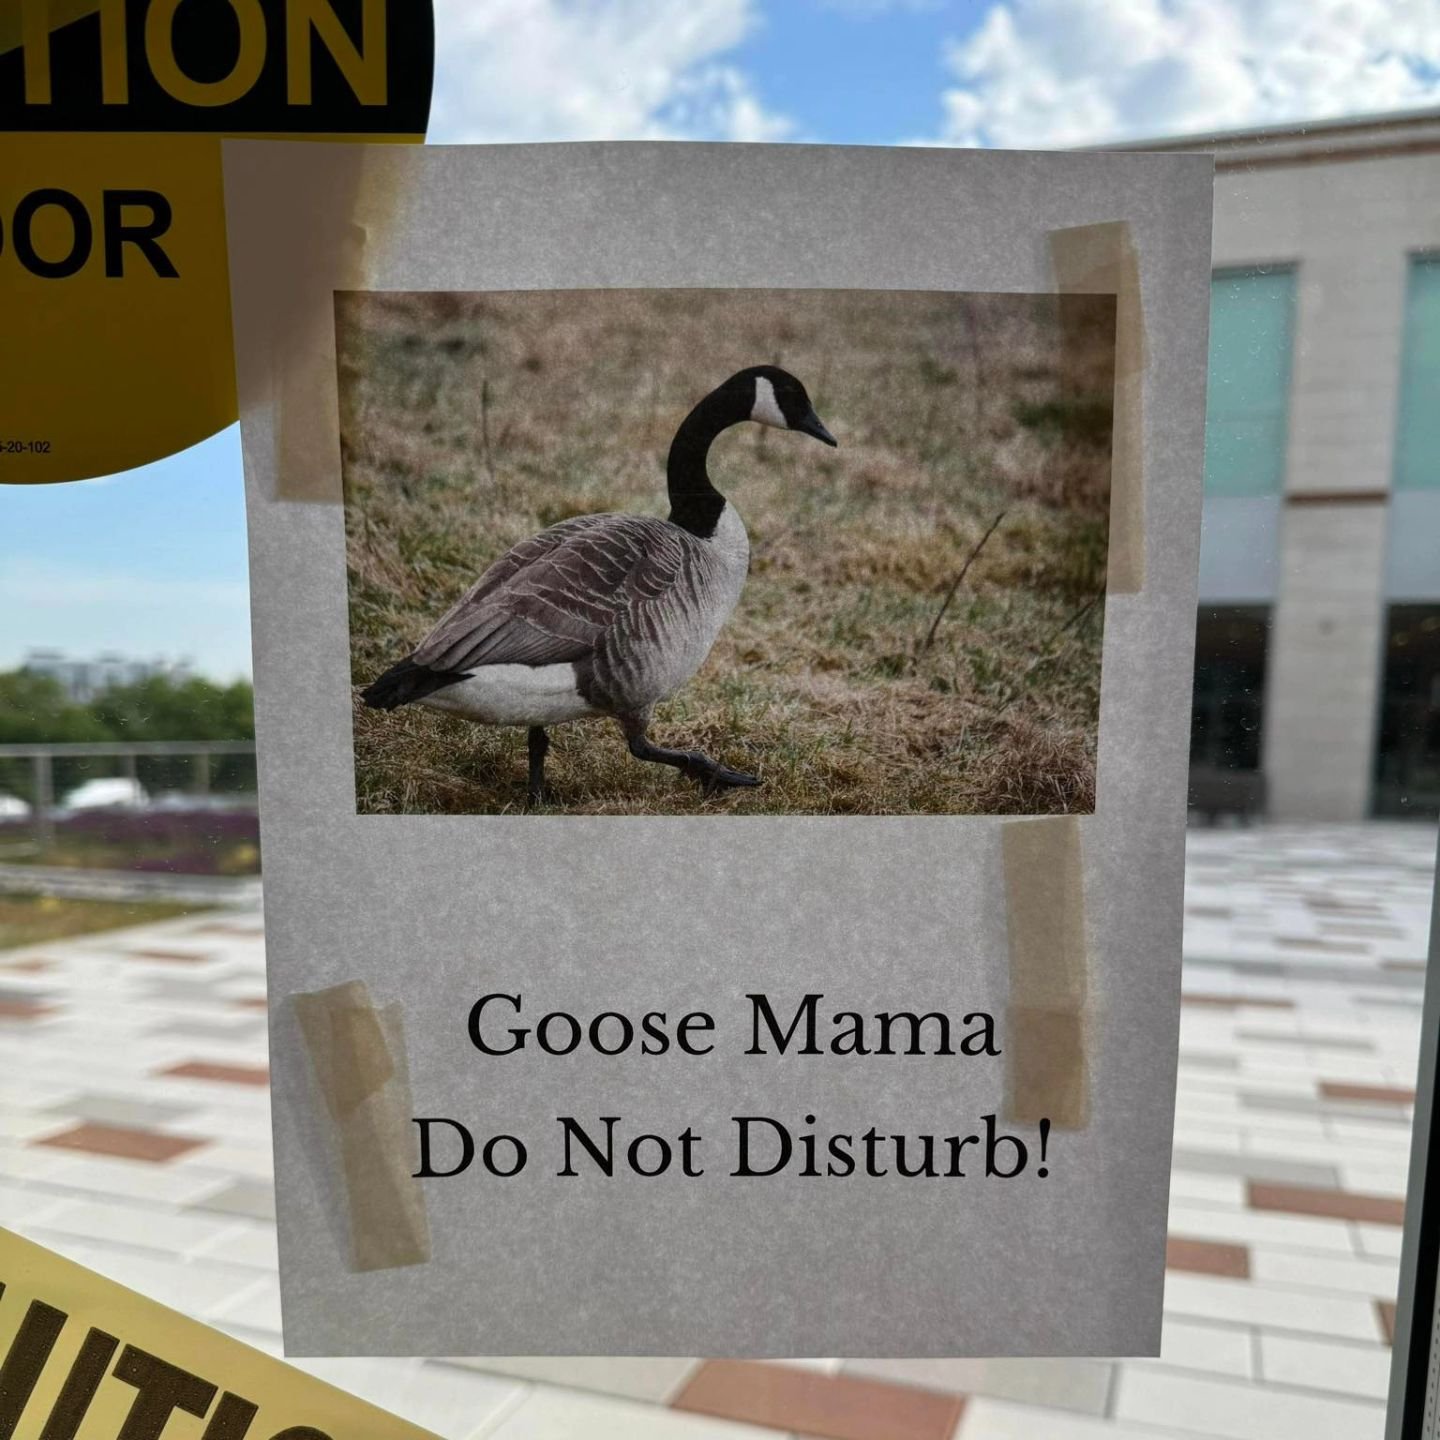 Huge shout out to CPCC for also making an effort to protect our wildlife.

Central Piedmont Community College (CPCC) 

From cpcc employee:
Central Piedmont Community College-we are protecting our momma goose! She's been up there on the roof garden fo